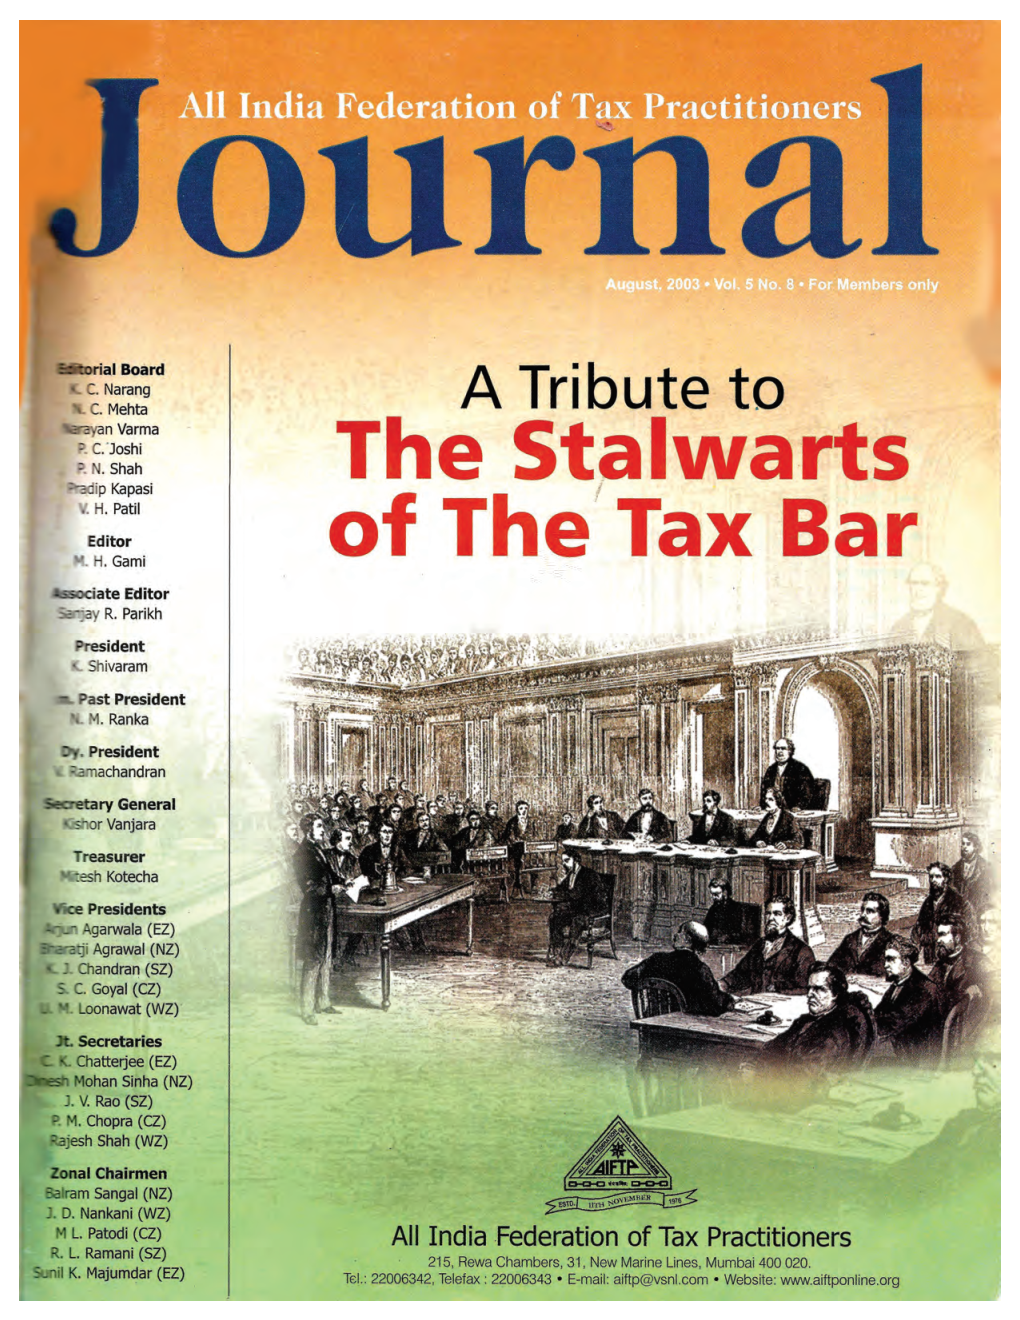 Atribute to the Stalwarts of the Tax Bar 1